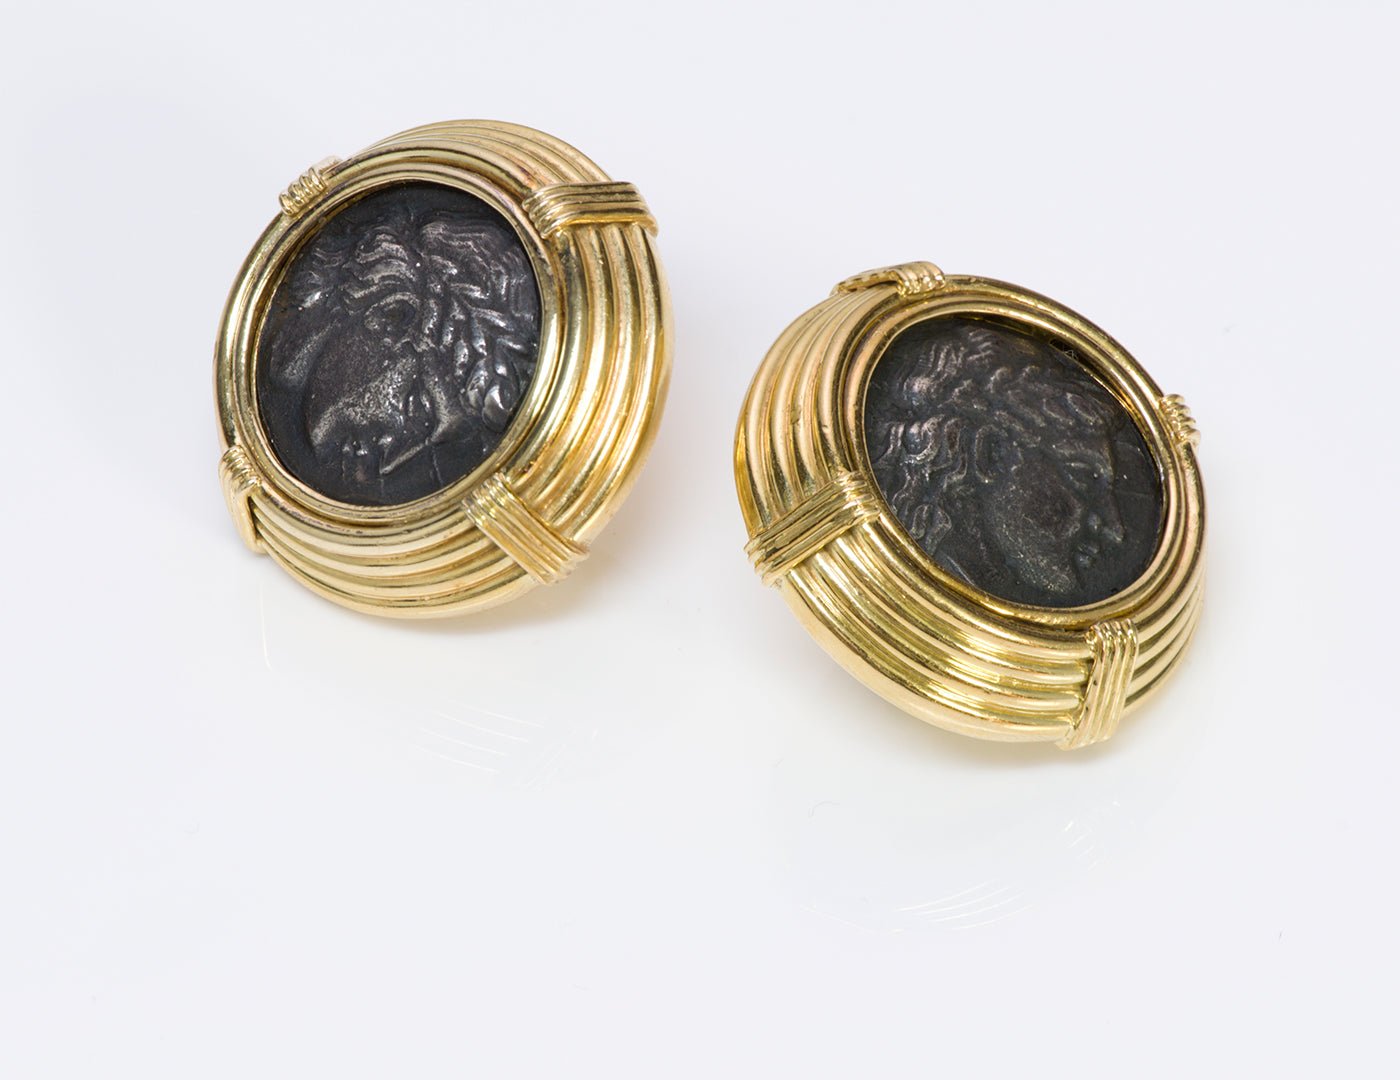 Vintage Gucci 18K Gold Ancient Coin Earrings